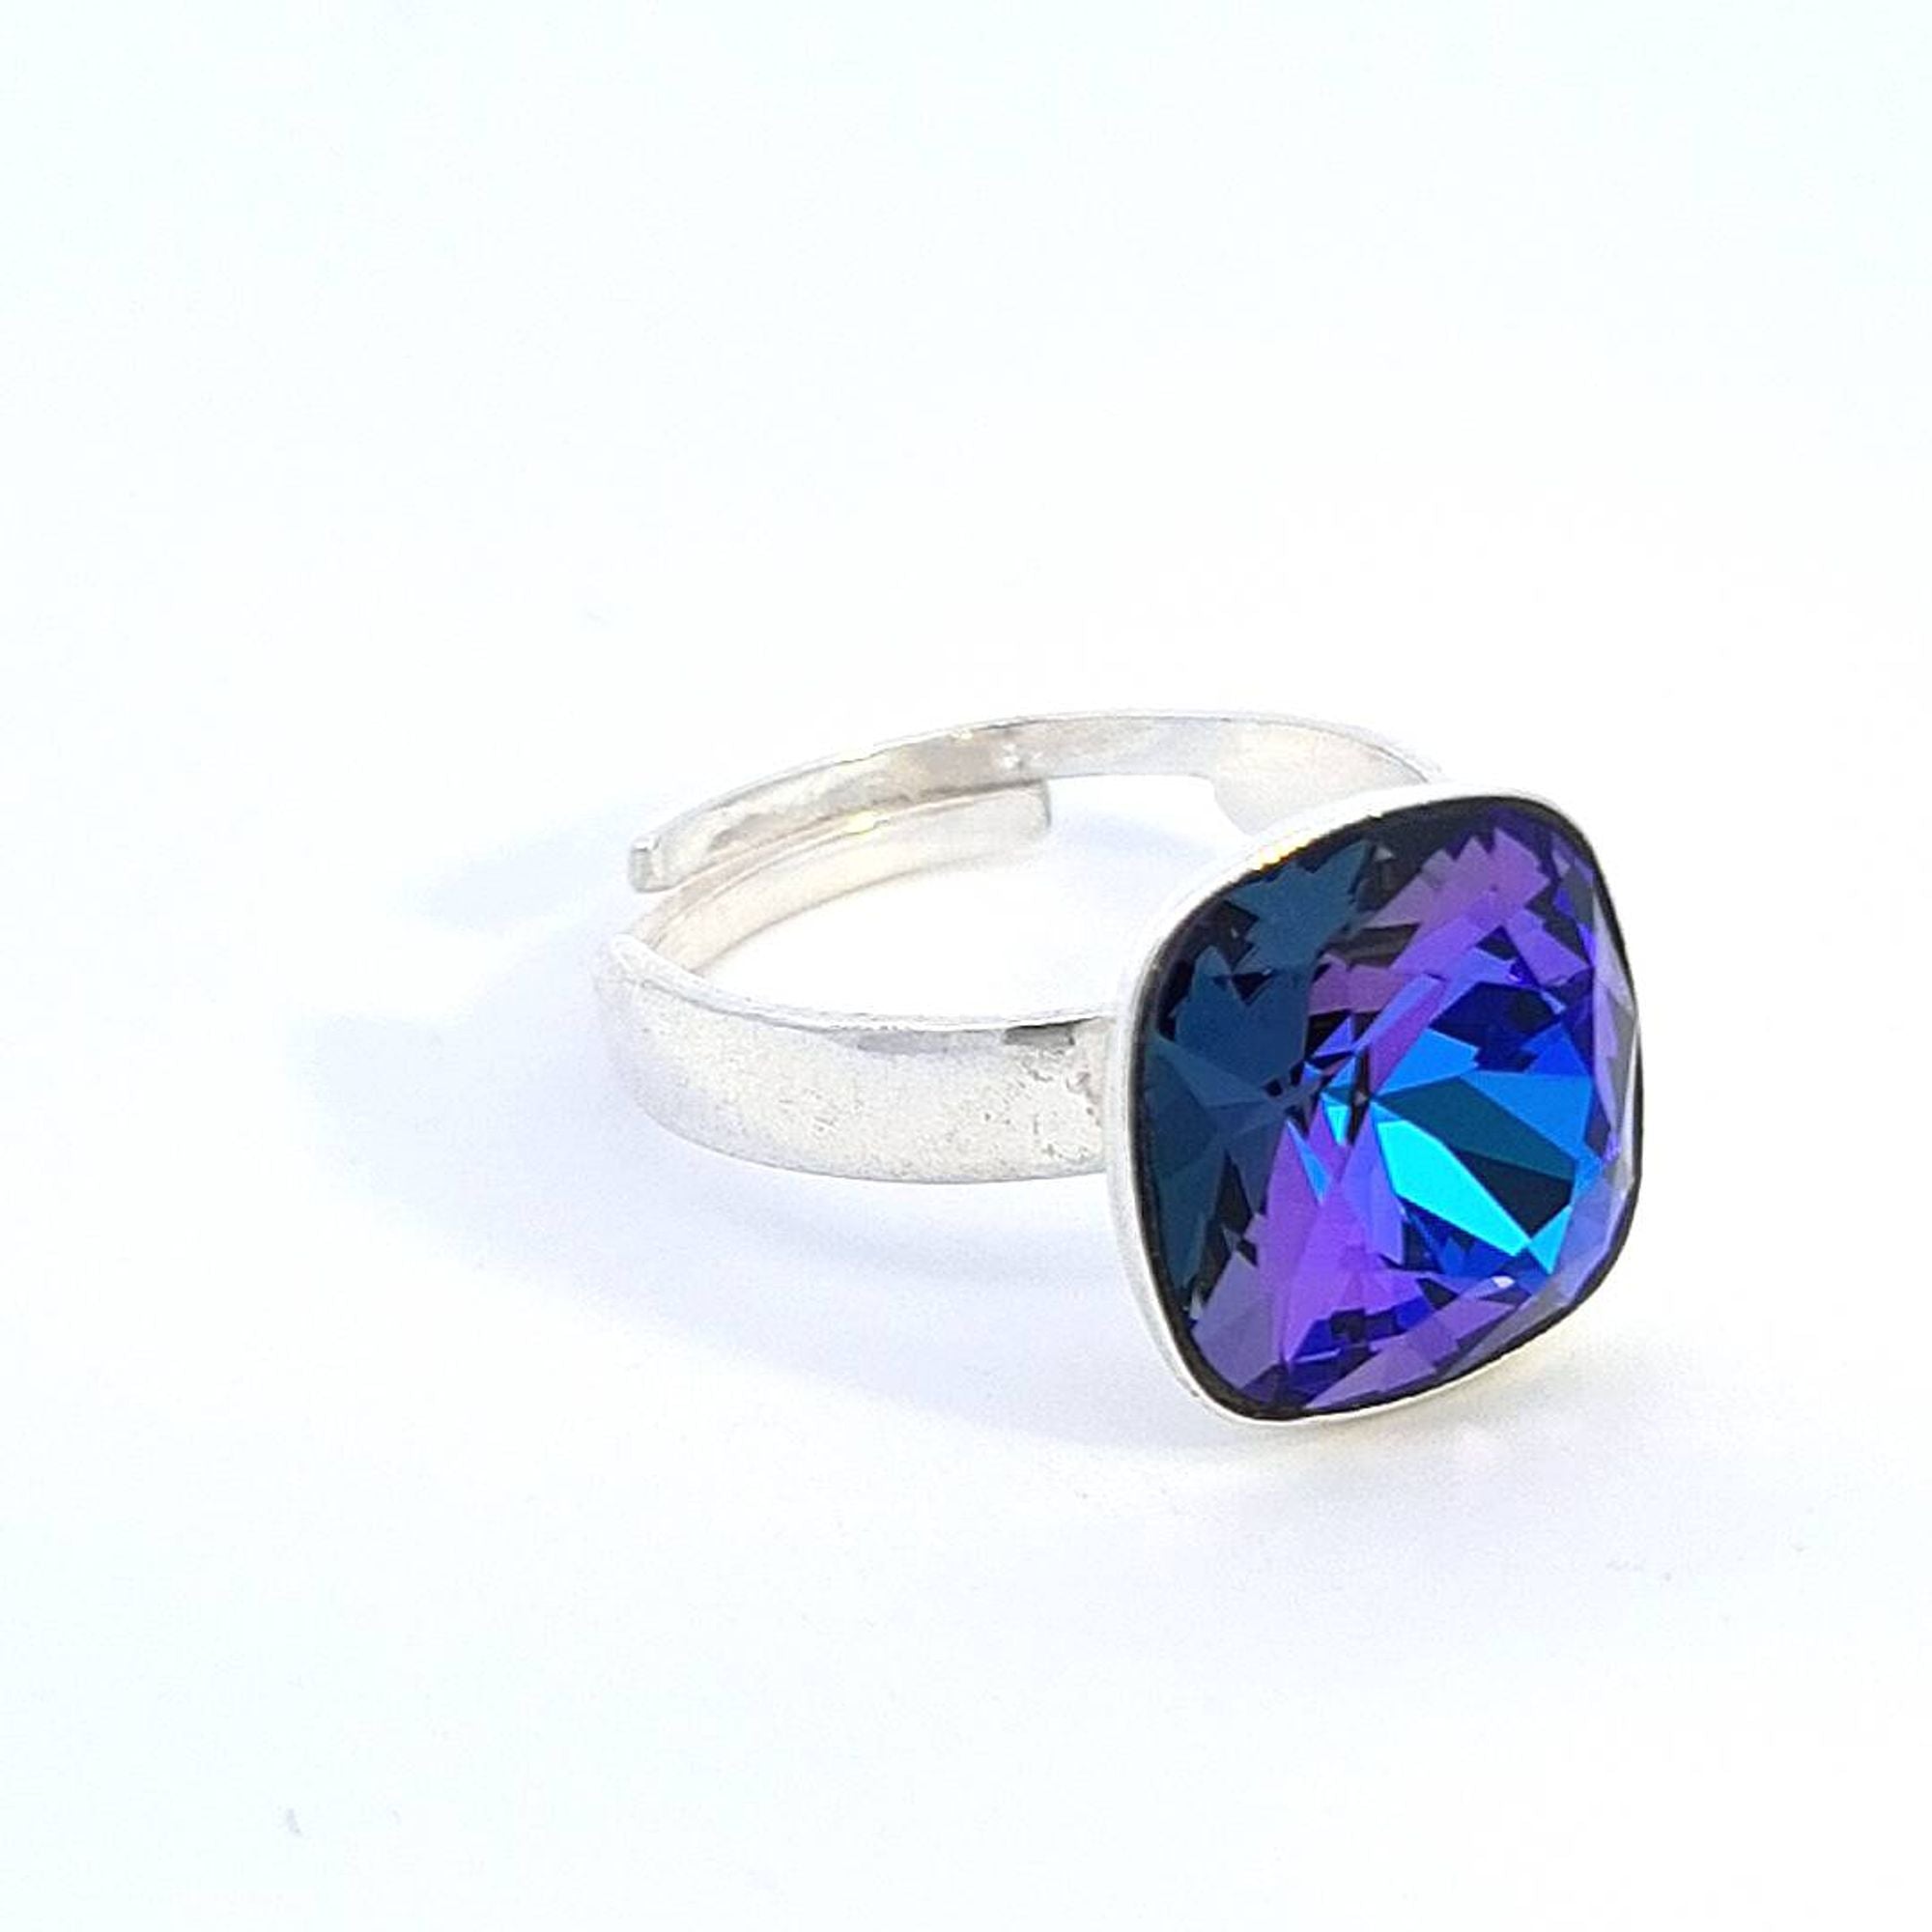 Magpie Gems Luminara Cushion Ring in Sterling Silver with Heliotrope Purple Crystal